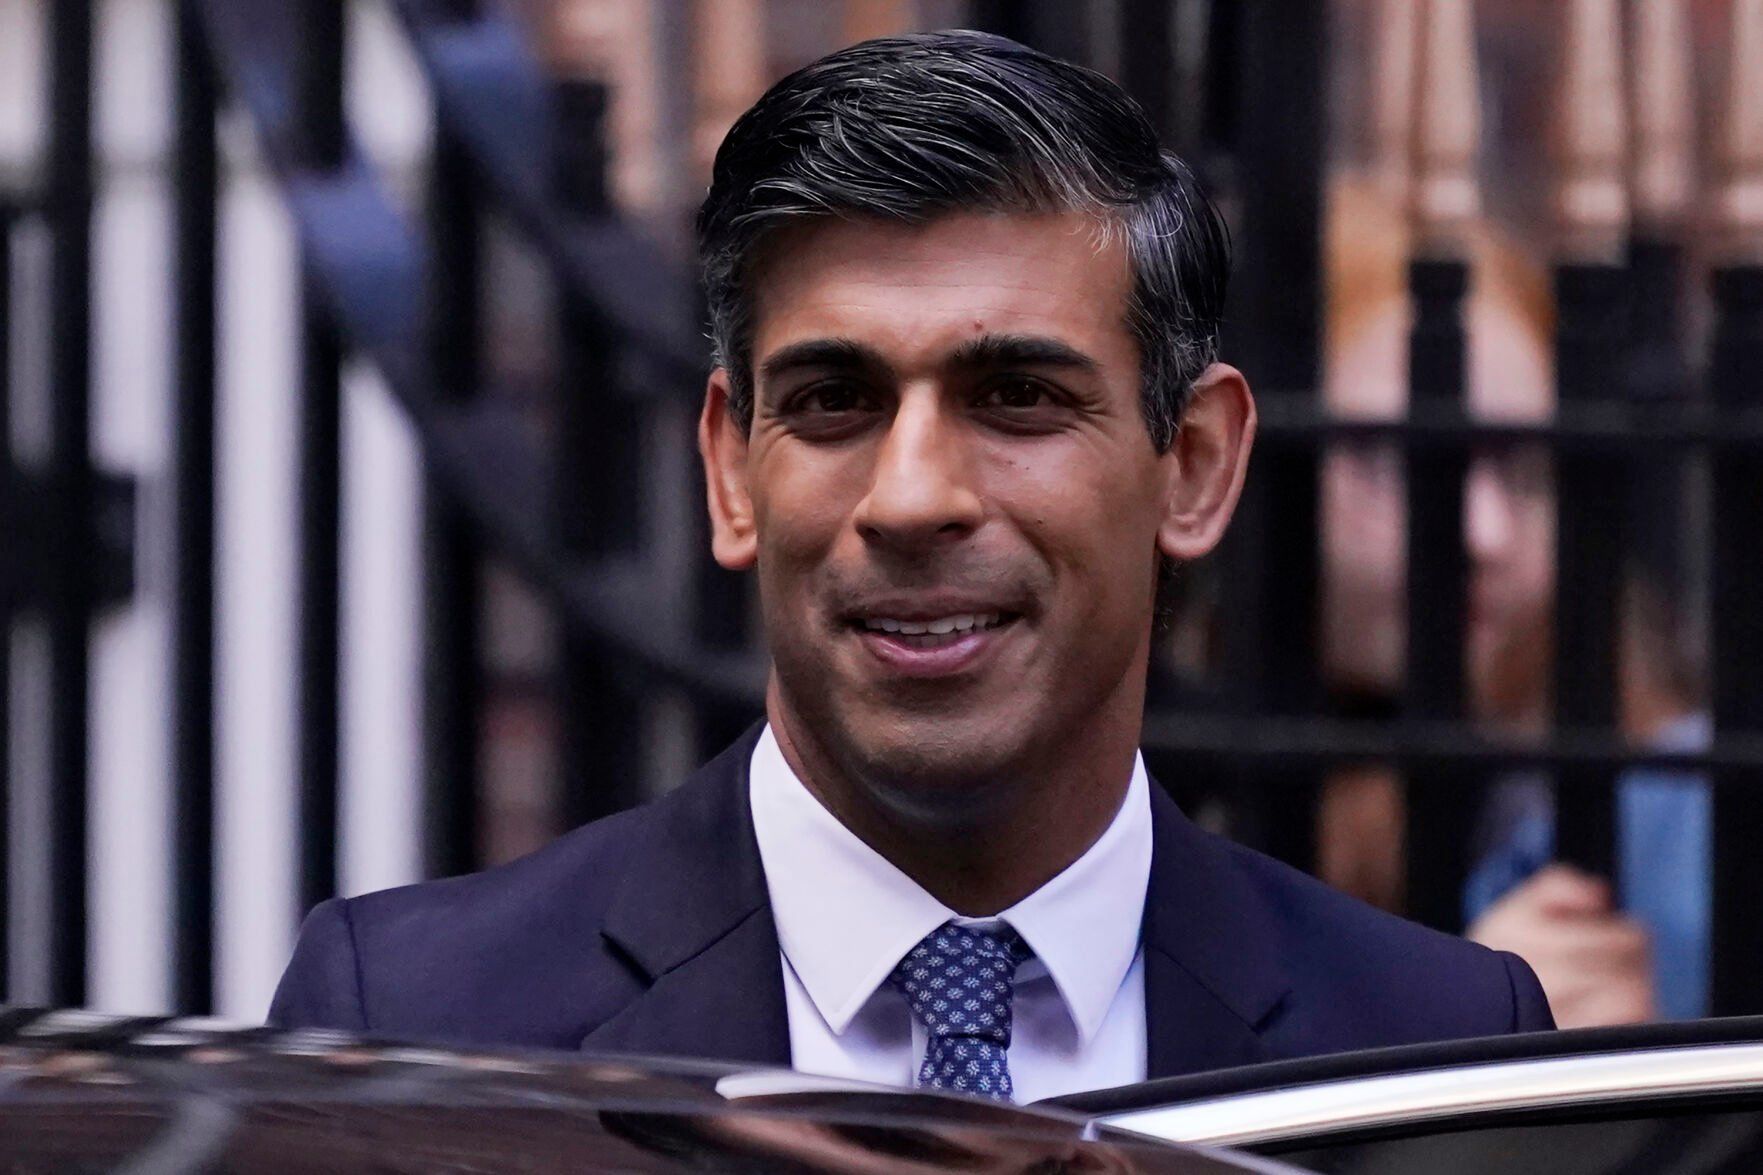 <p>Rishi Sunak leaves the Conservative Campaign Headquarters in London, Monday, Oct. 24, 2022. Rishi Sunak will become the next Prime Minister after winning the Conservative Party leadership contest. (AP Photo/Aberto Pezzali)</p>   PHOTO CREDIT: Aberto Pezzali - stringer, AP